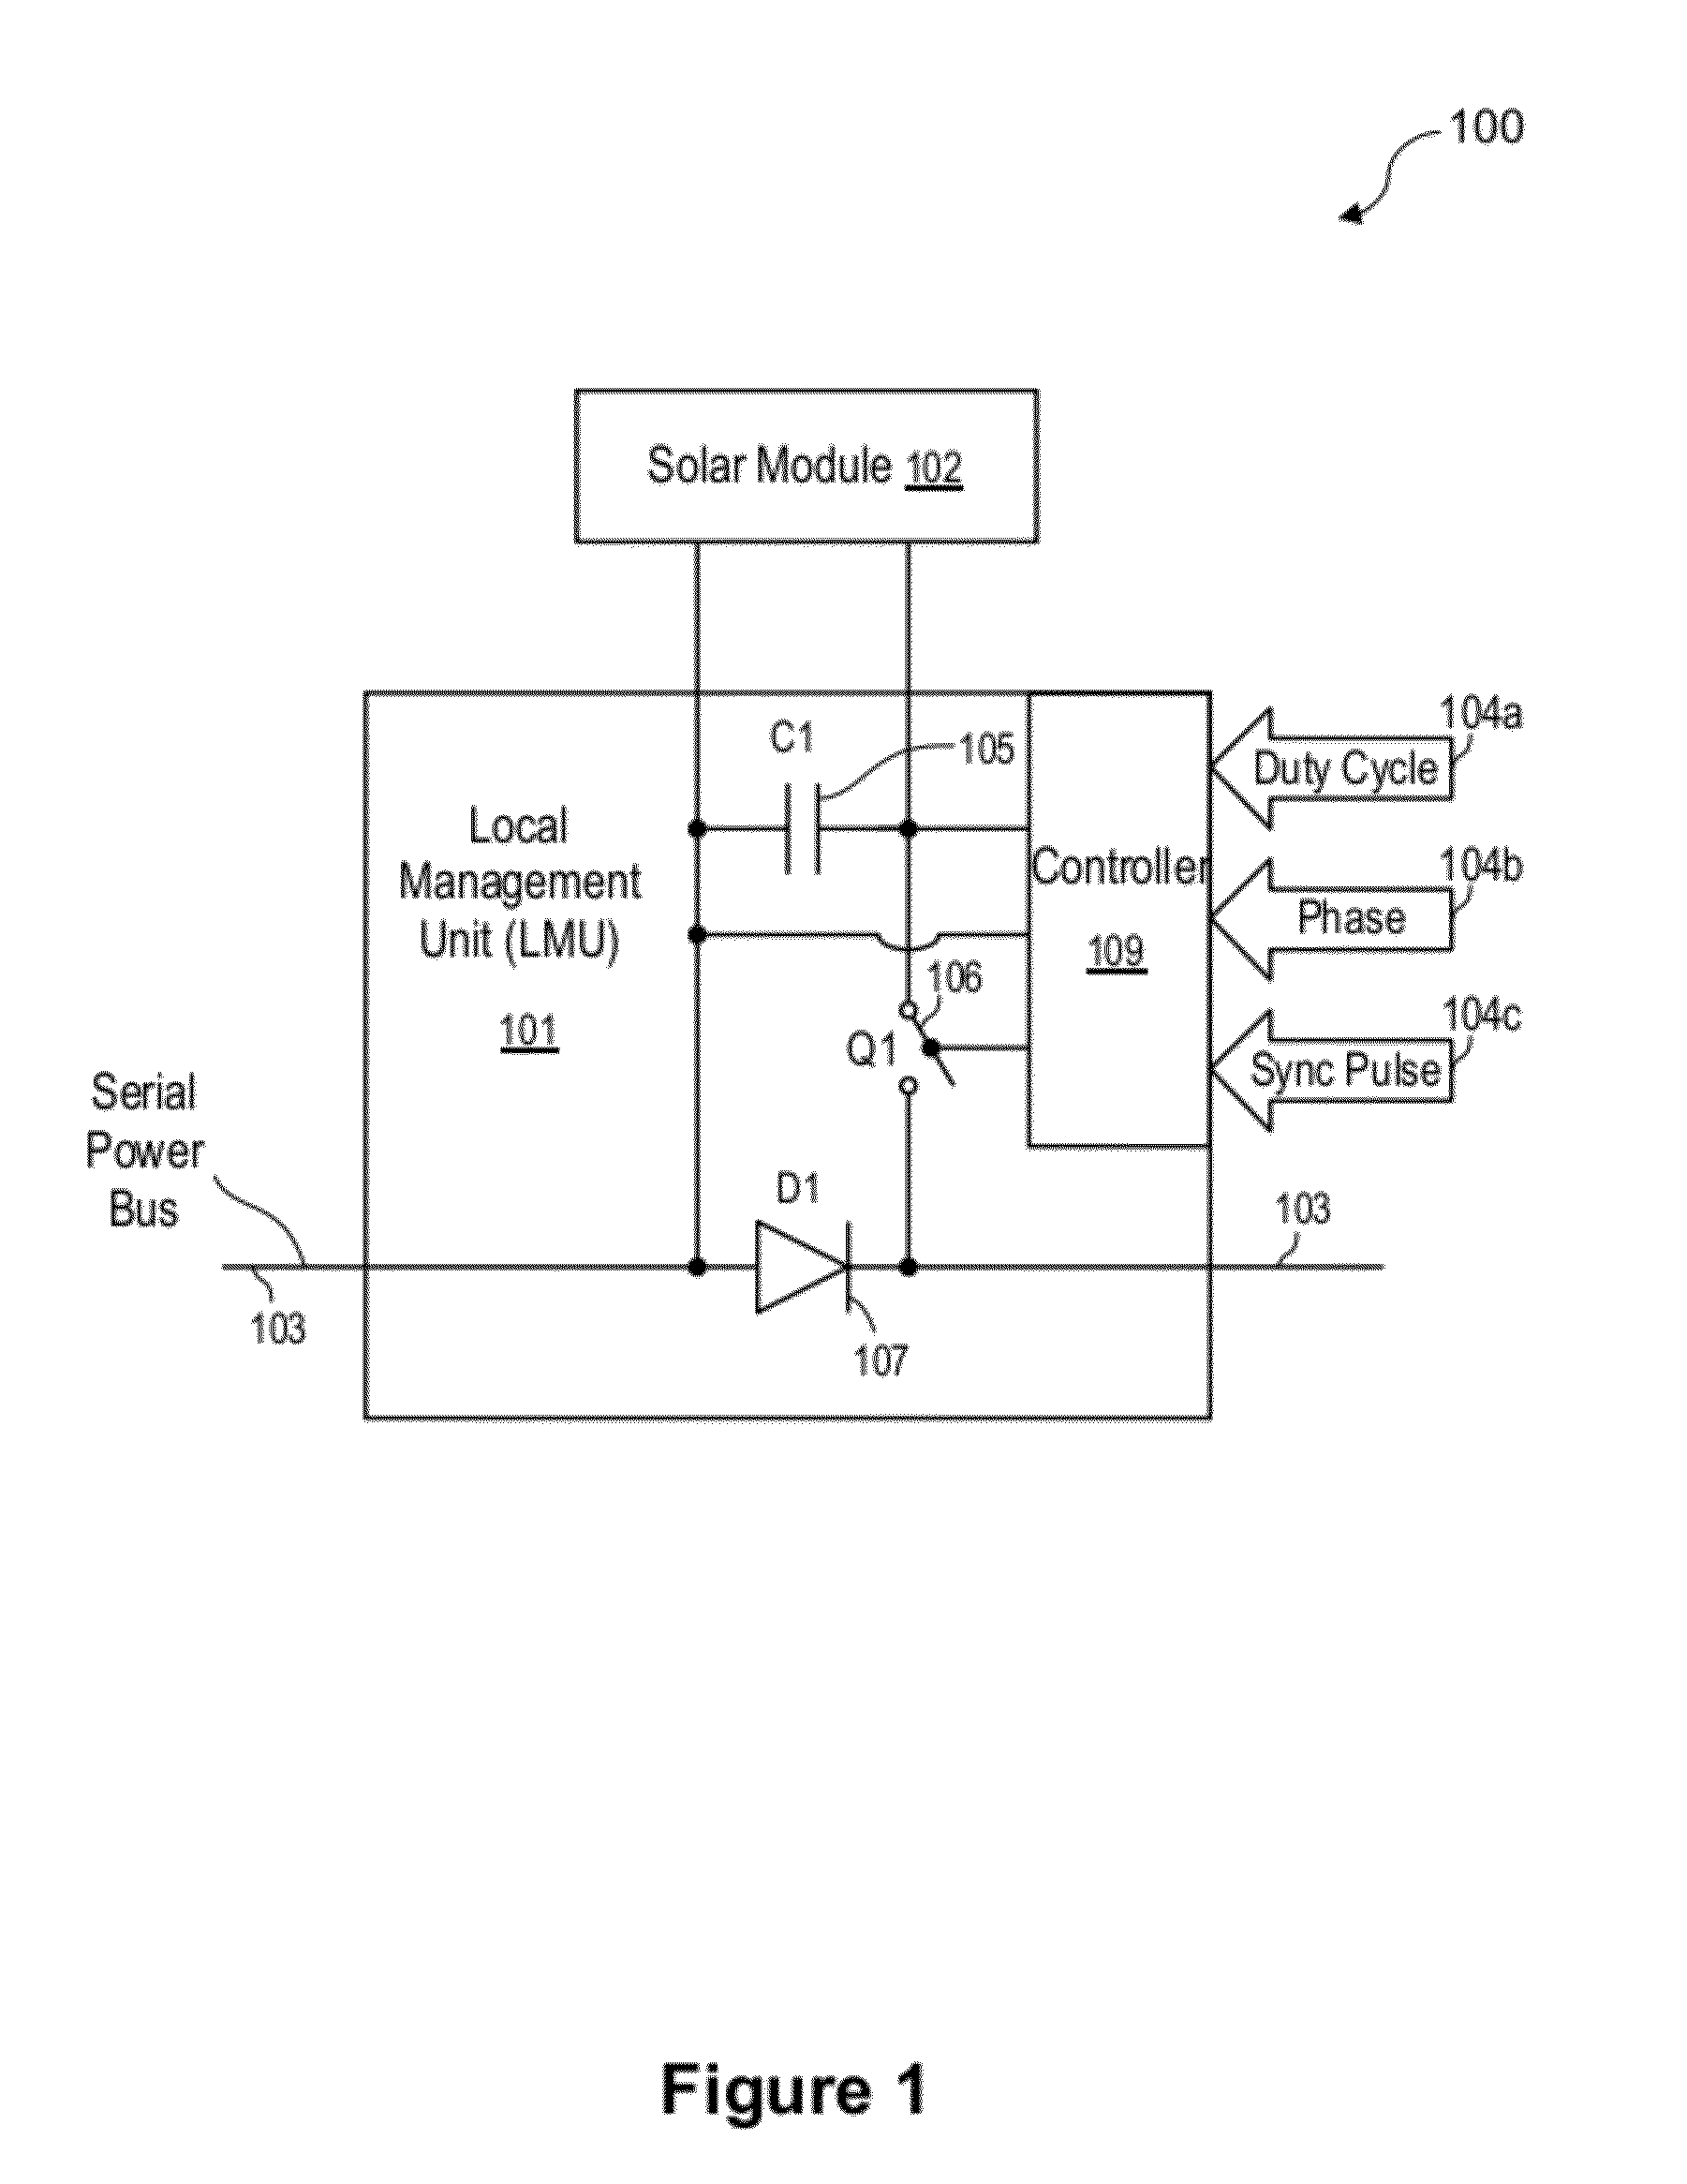 Enhanced Systems and Methods for Using a Power Converter for Balancing Modules in Single-String and Multi-String Configurations